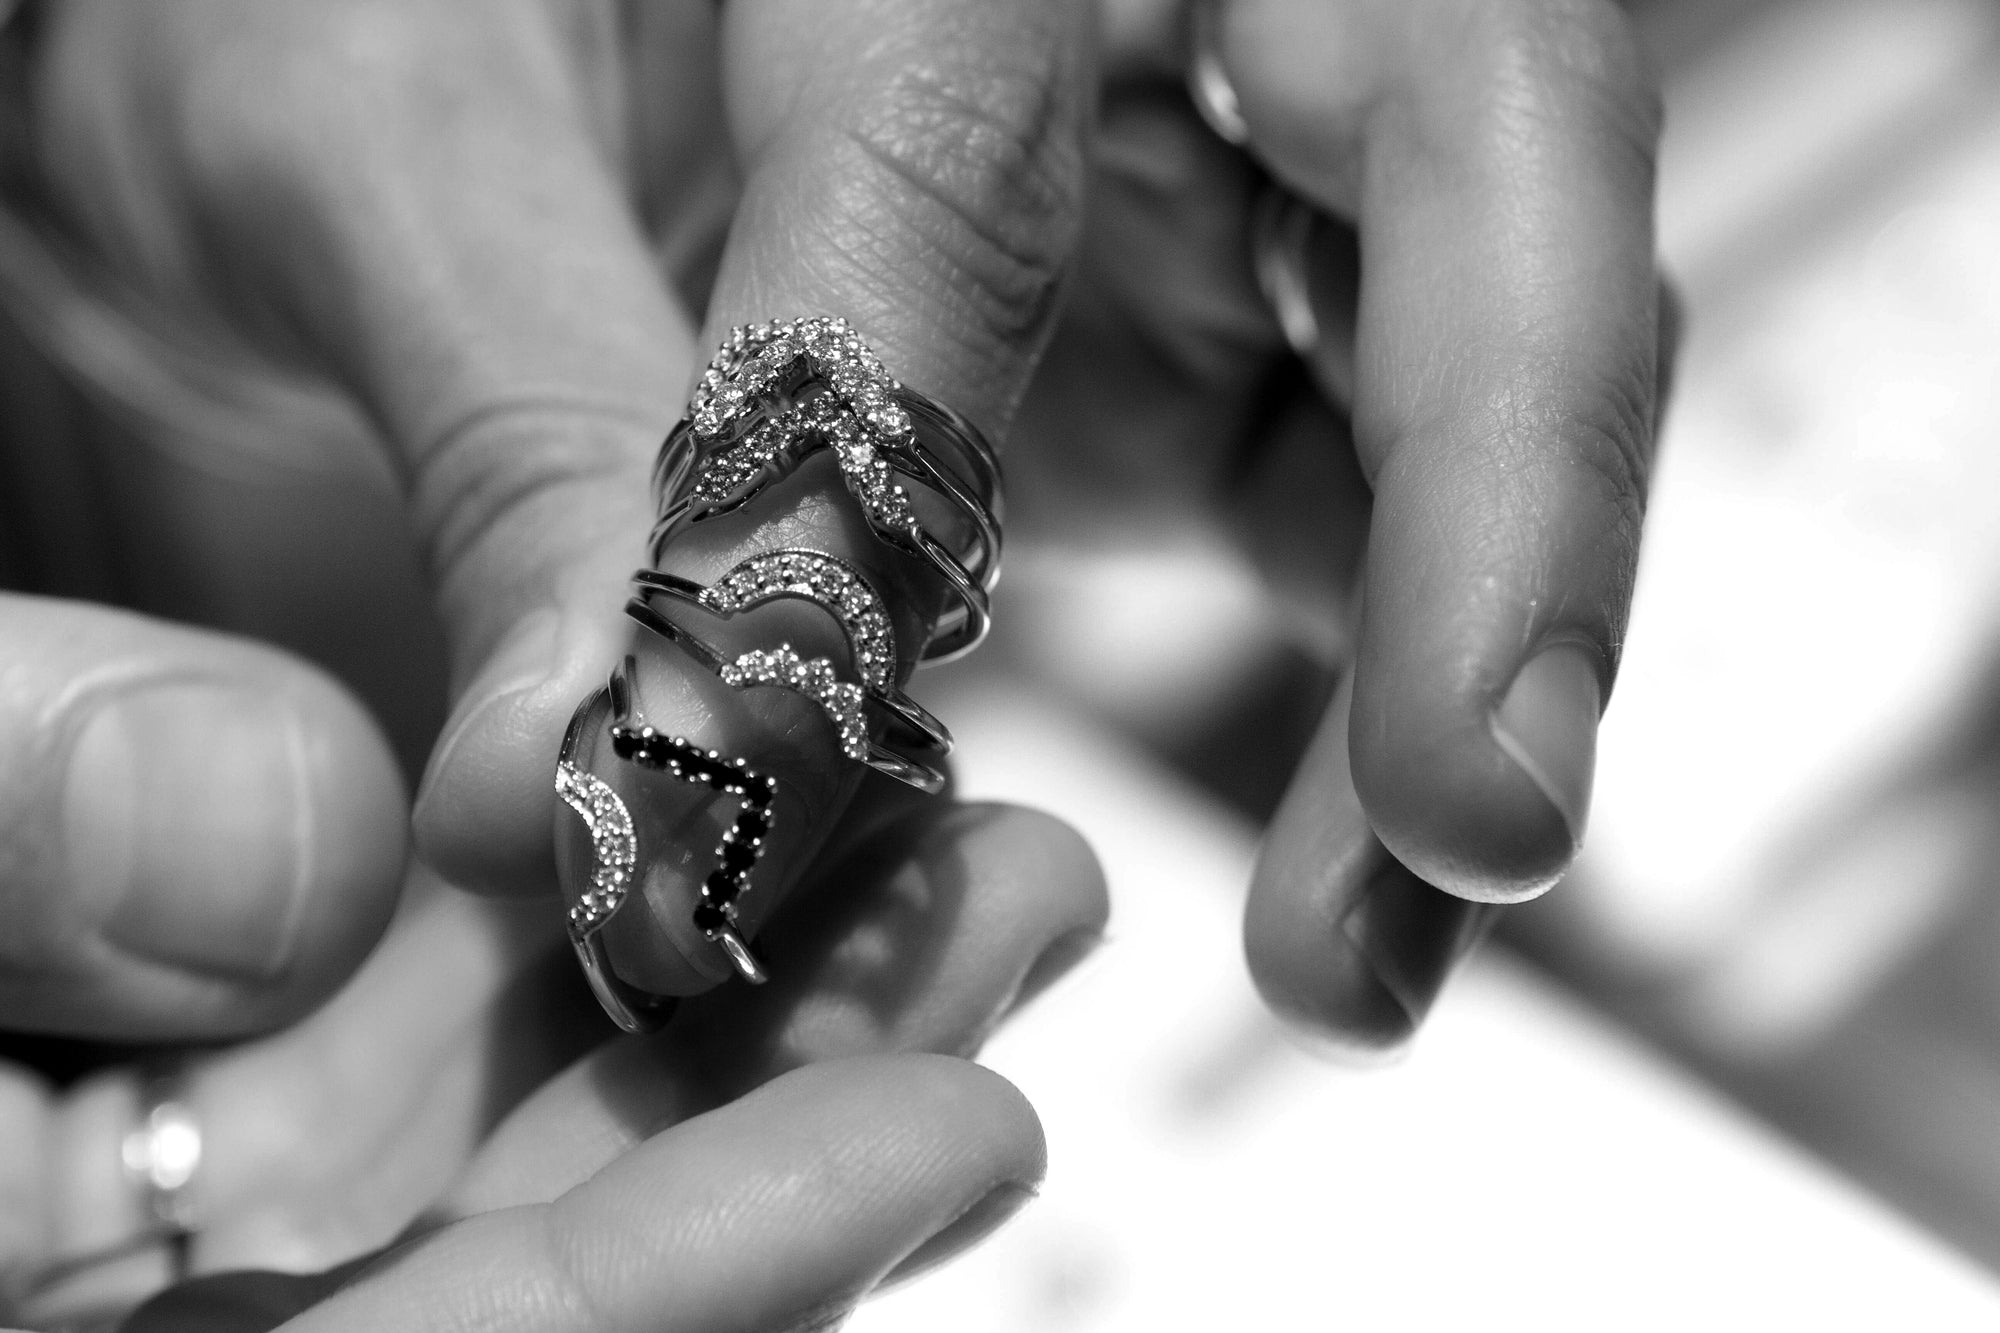 A black and white close up image of a hand with seven wedding bands graduating along the finger from tip to knuckle.